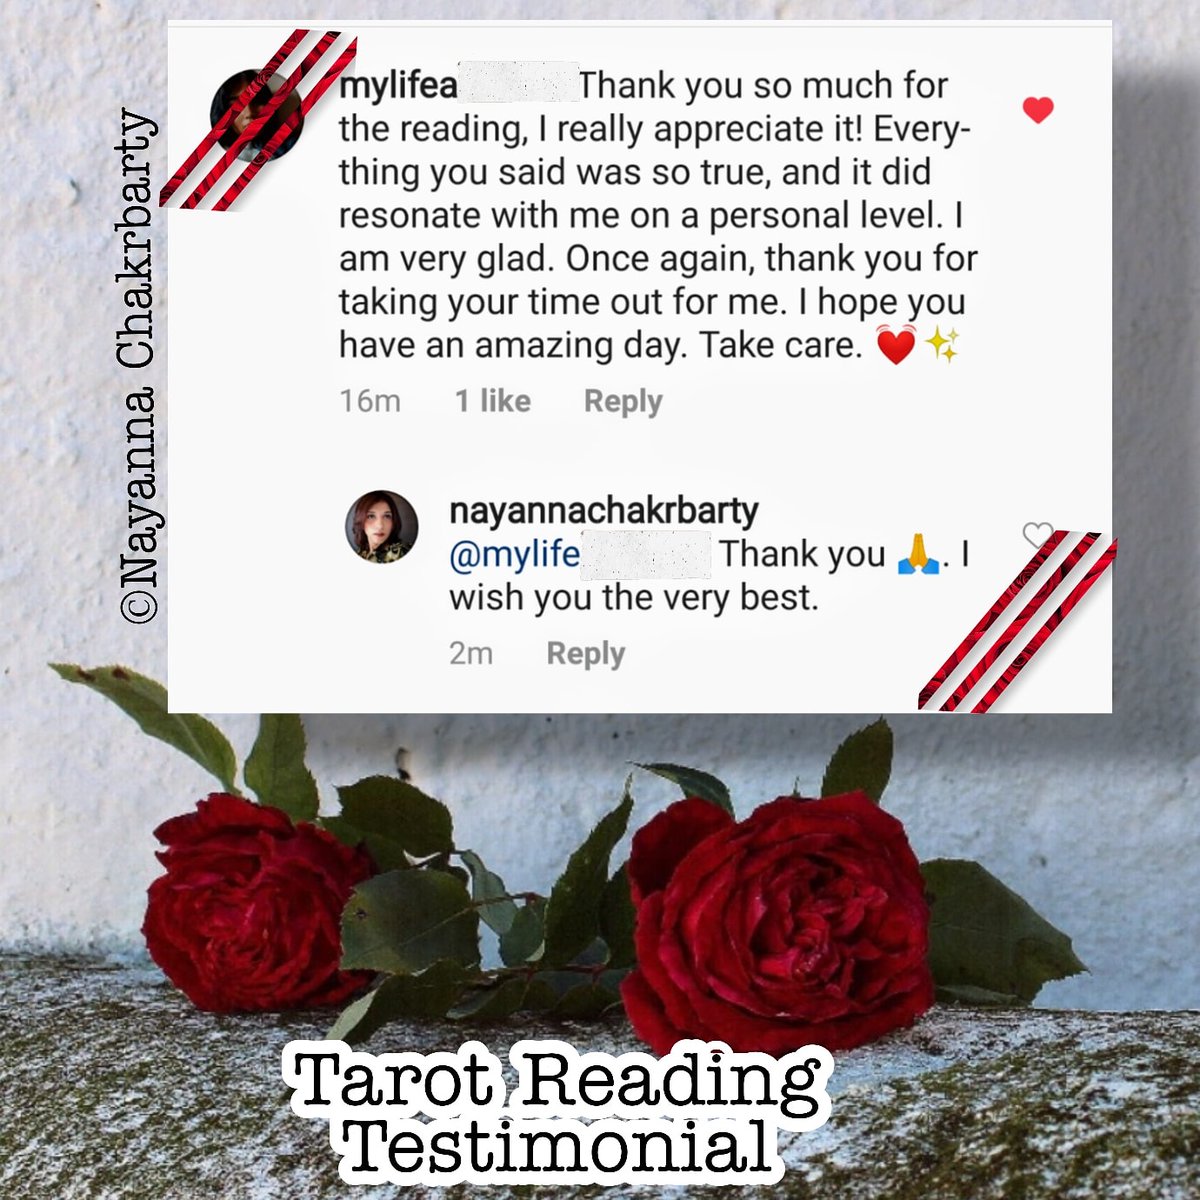 Unload your inner conflicts and fears. Get answers to your obstacles in life with my tarot reading. DM for details. #soothsayernc #innerconflict #conflict #unload #overcomefear #happyclientshappyme #happyclienthappylife #testimonial #clientreview #recommendations